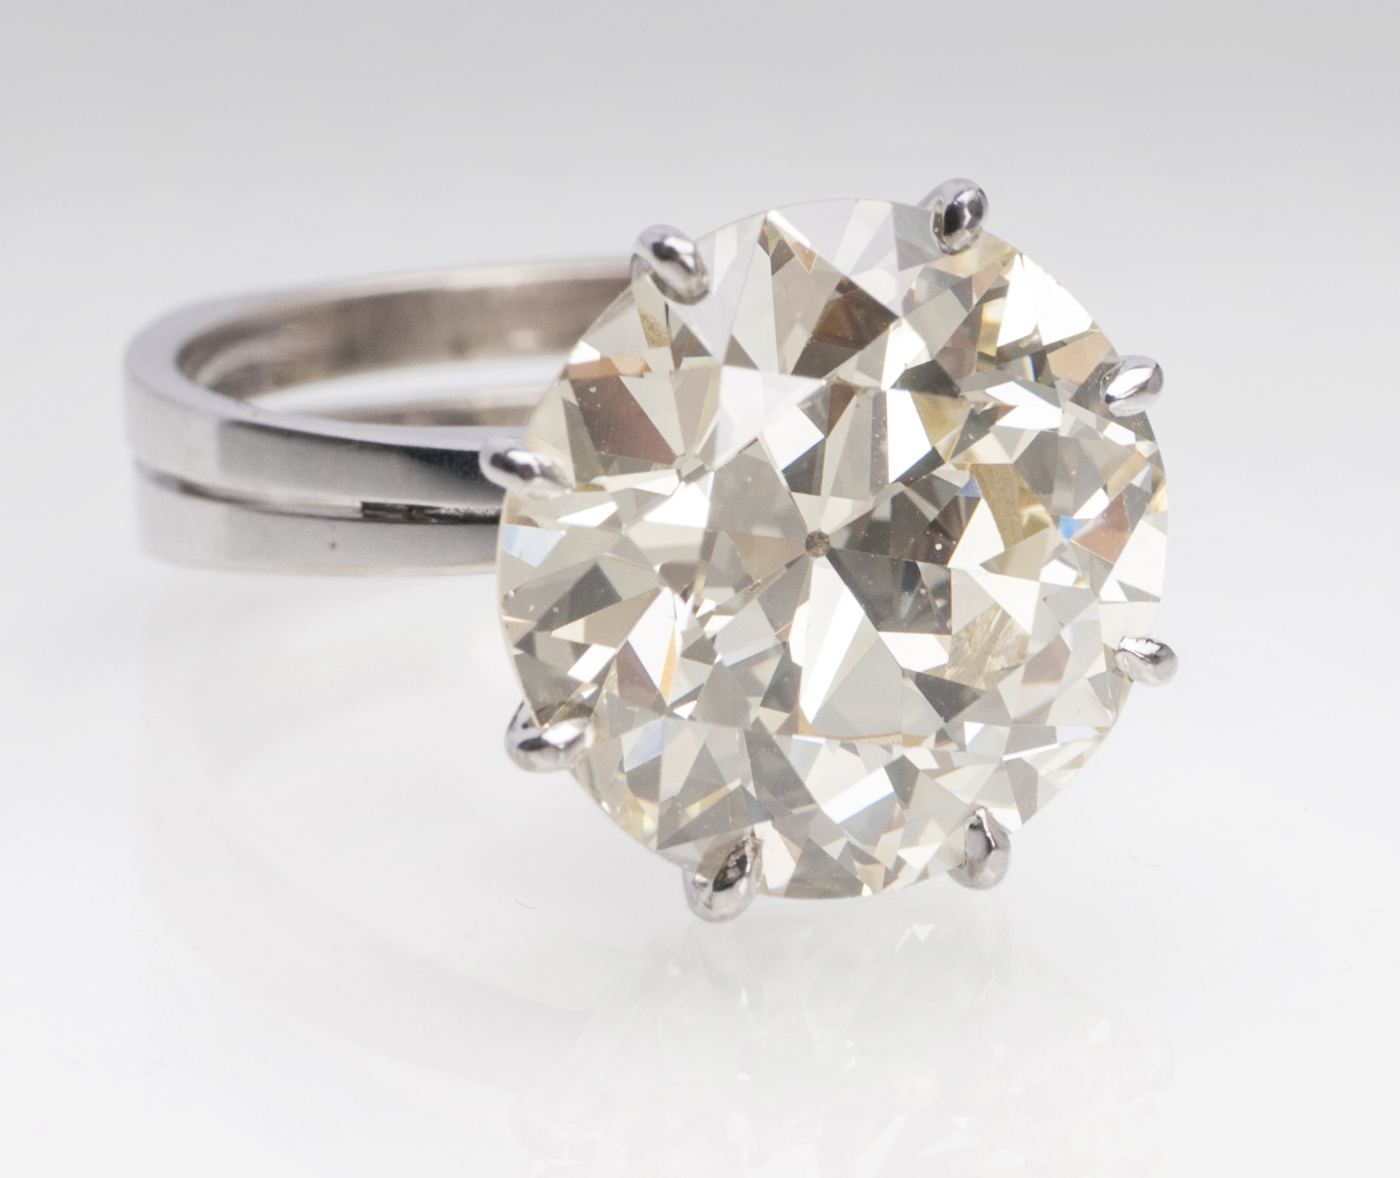 An extraordinaqry solitaire ring with one highcarat Fancy Old Cut Diamond - image 2